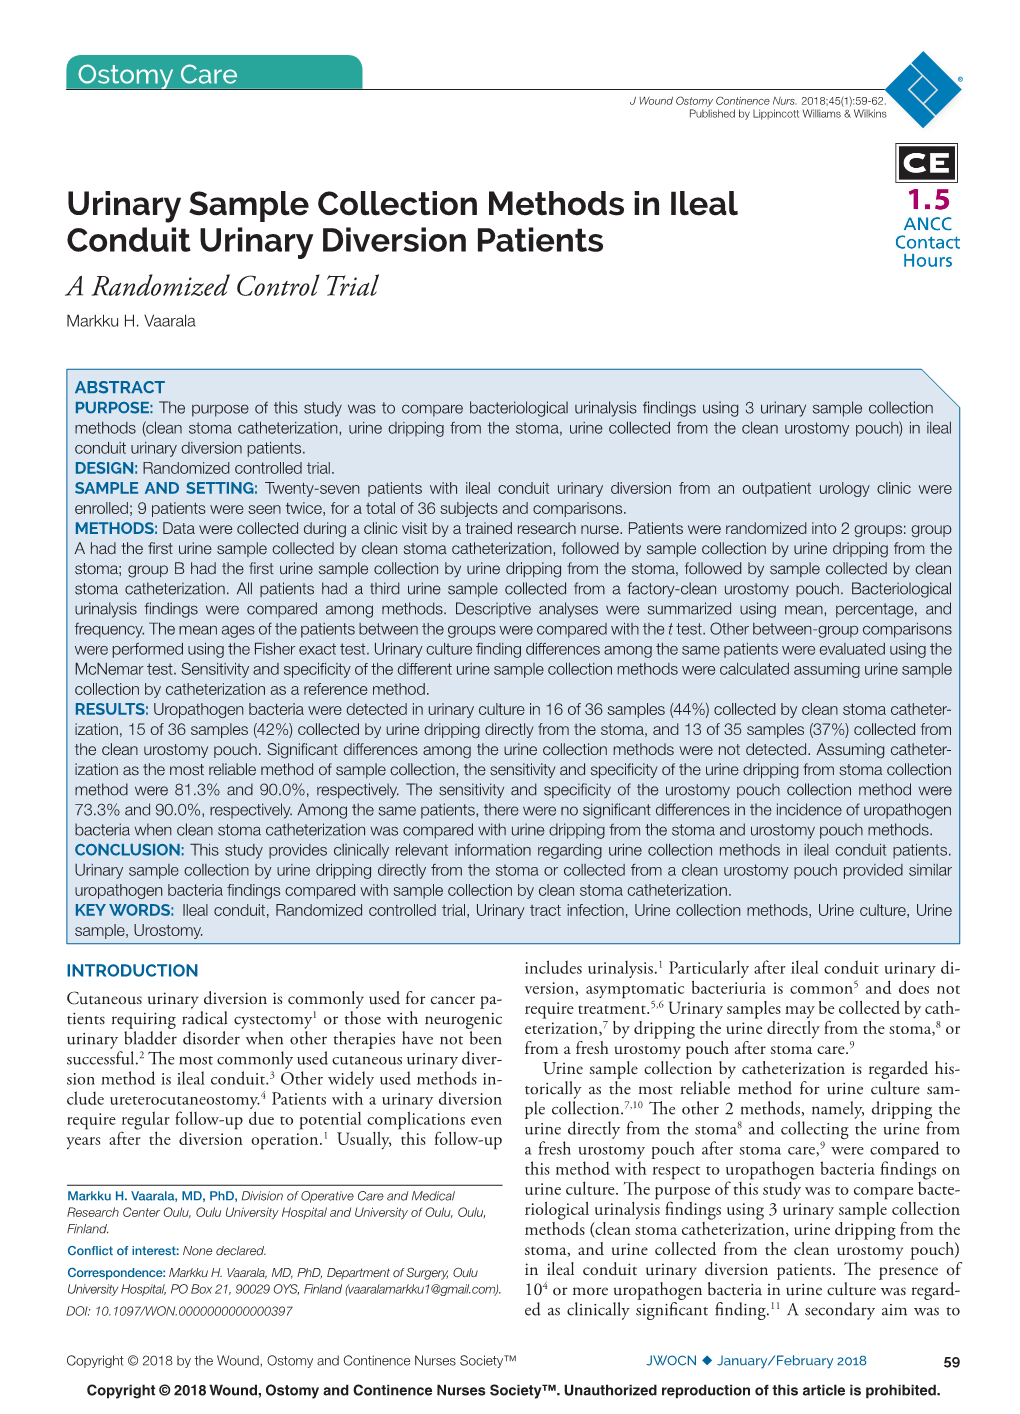 Urinary Sample Collection Methods in Ileal Conduit Urinary Diversion Patients a Randomized Control Trial Markku H